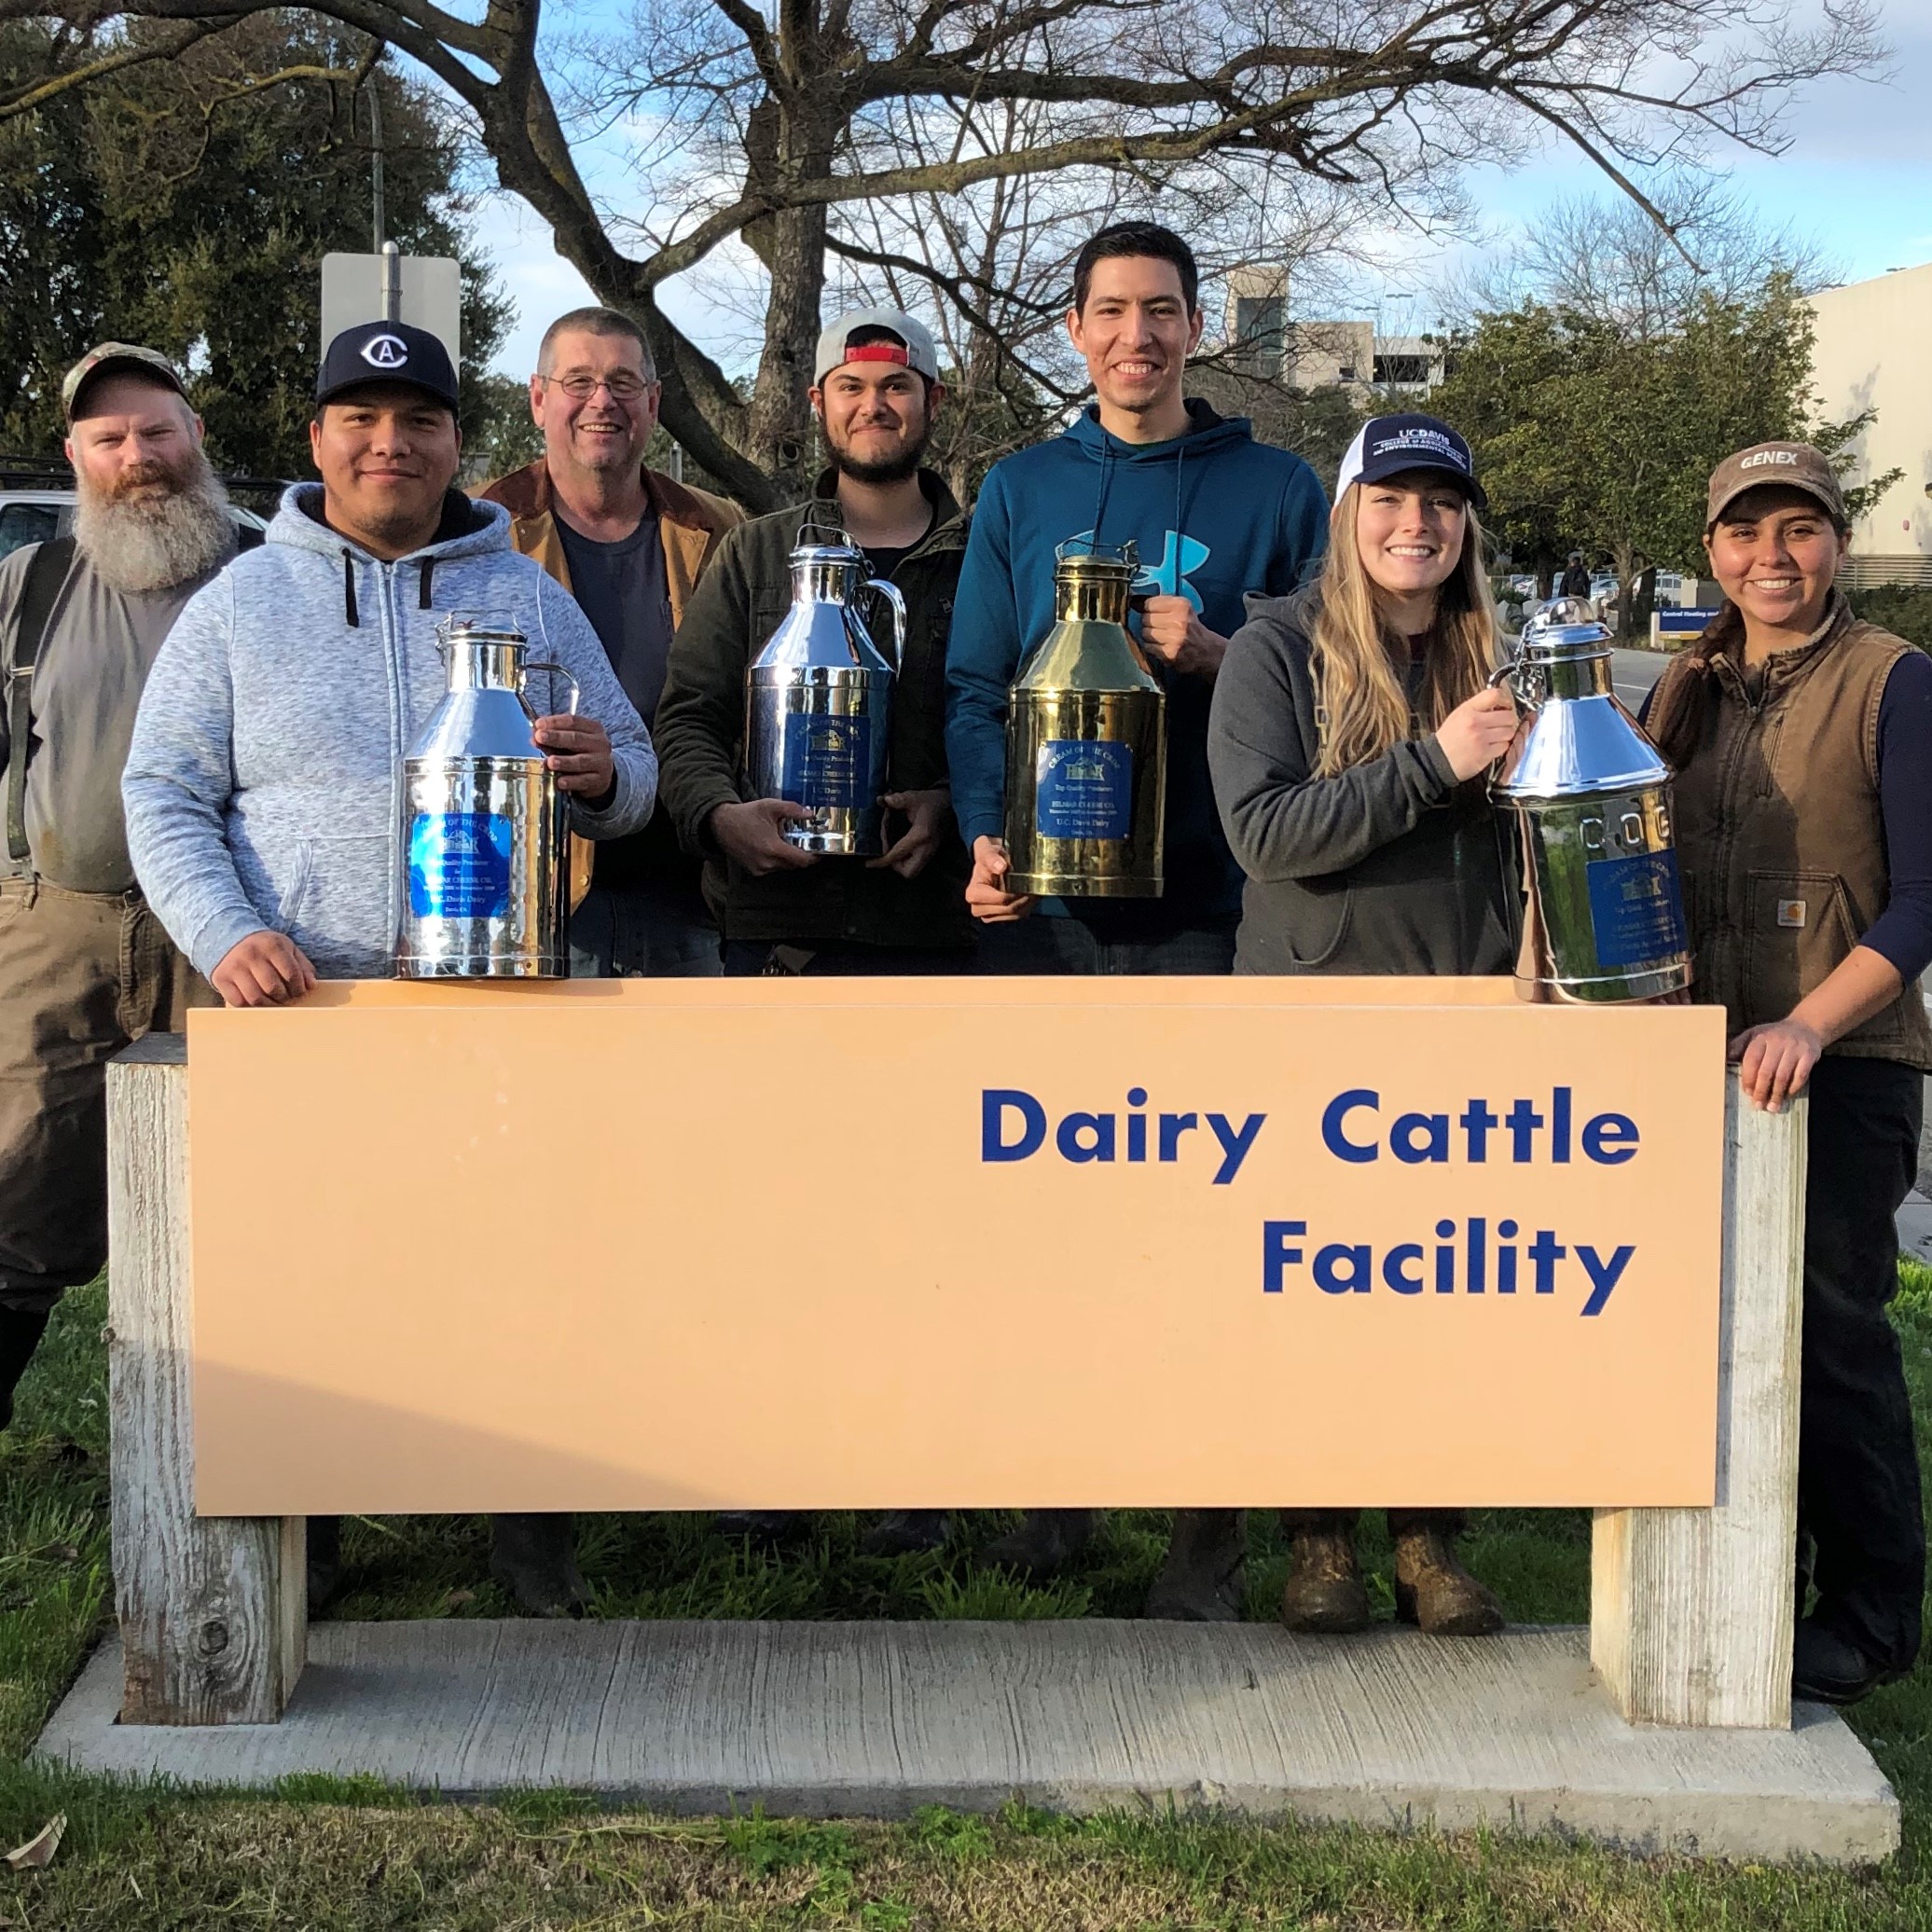 The UC Davis Dairy team from left to right: Paul Domer (staff milker), Eduardo Monteon (student milker), Doug Gisi (manager), Emmanuel Espinoza (student milker), Juan Hernandez (staff milker), Lindsey Smith (student milker) and Maria Patino (assistant manager).